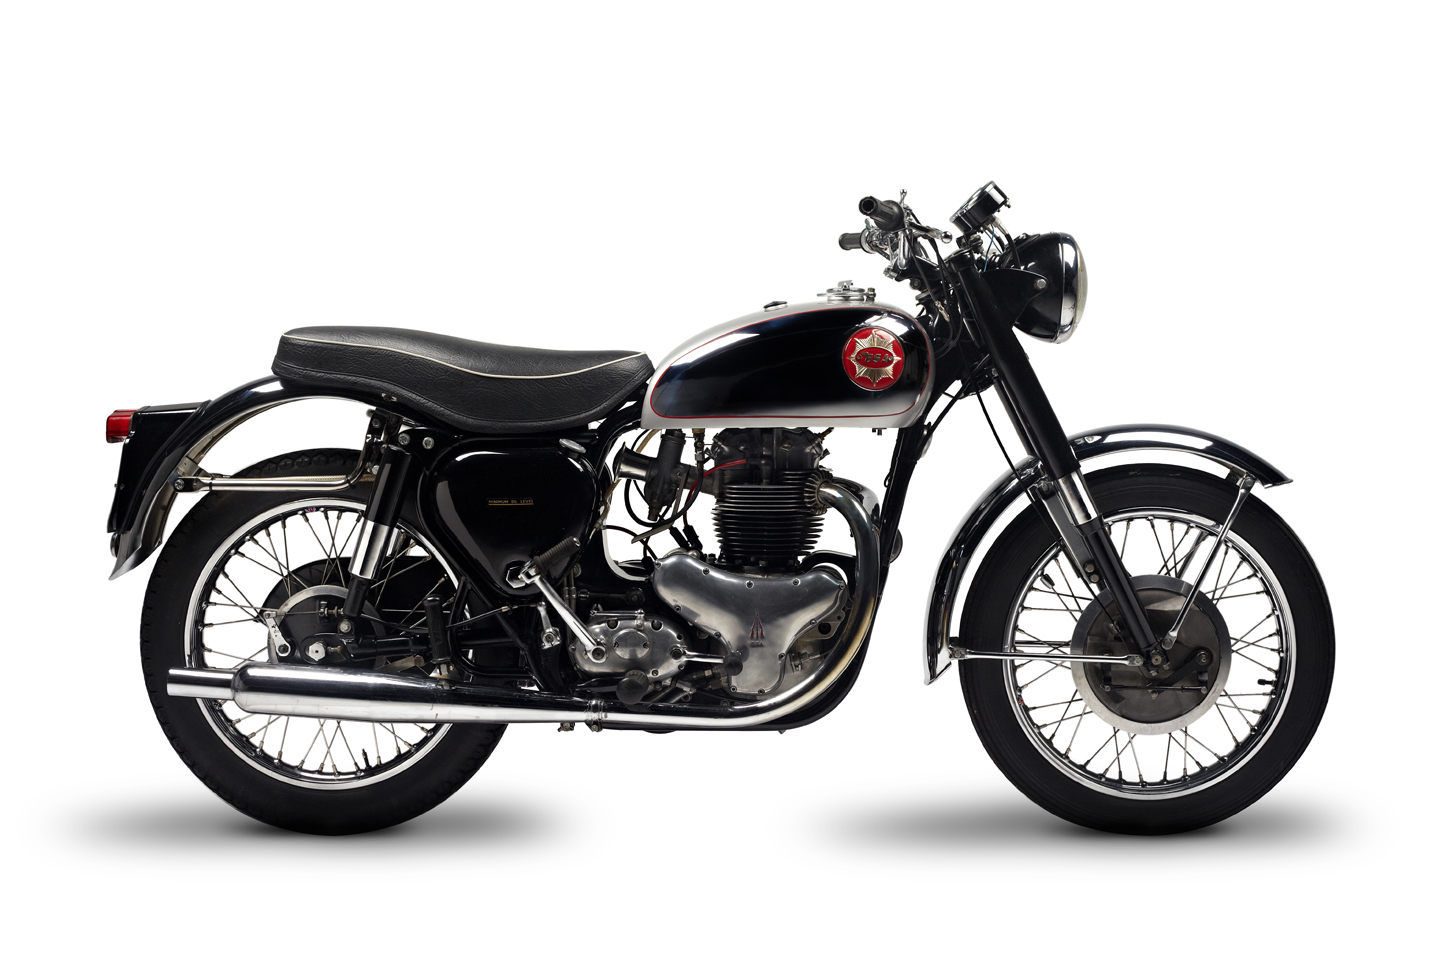 Mahindra Acquires BSA for Revival of Motor Cycle Business